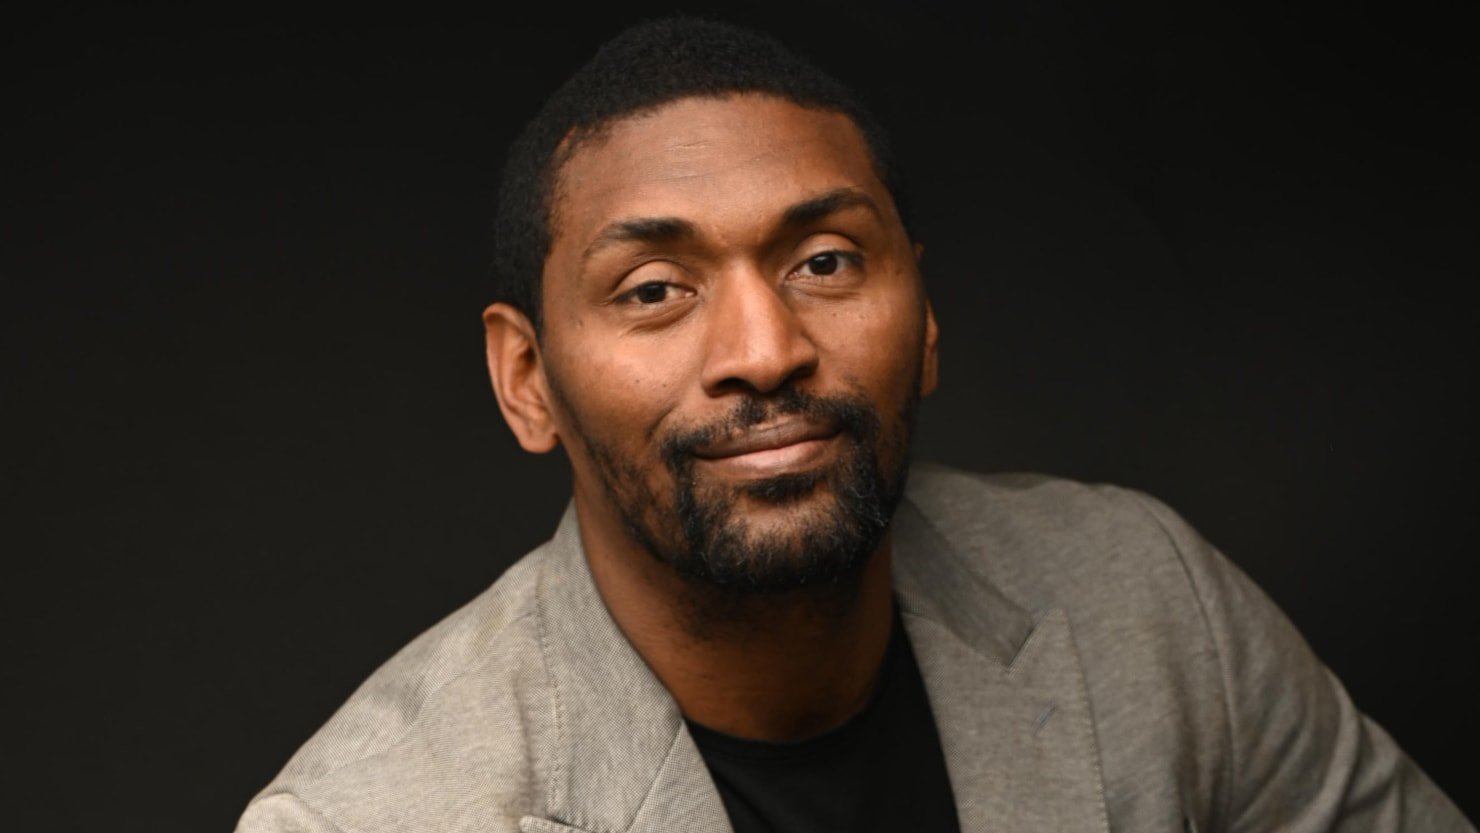 The NBA Star Formerly Known as Ron Artest Has a Message for Today’s Fans